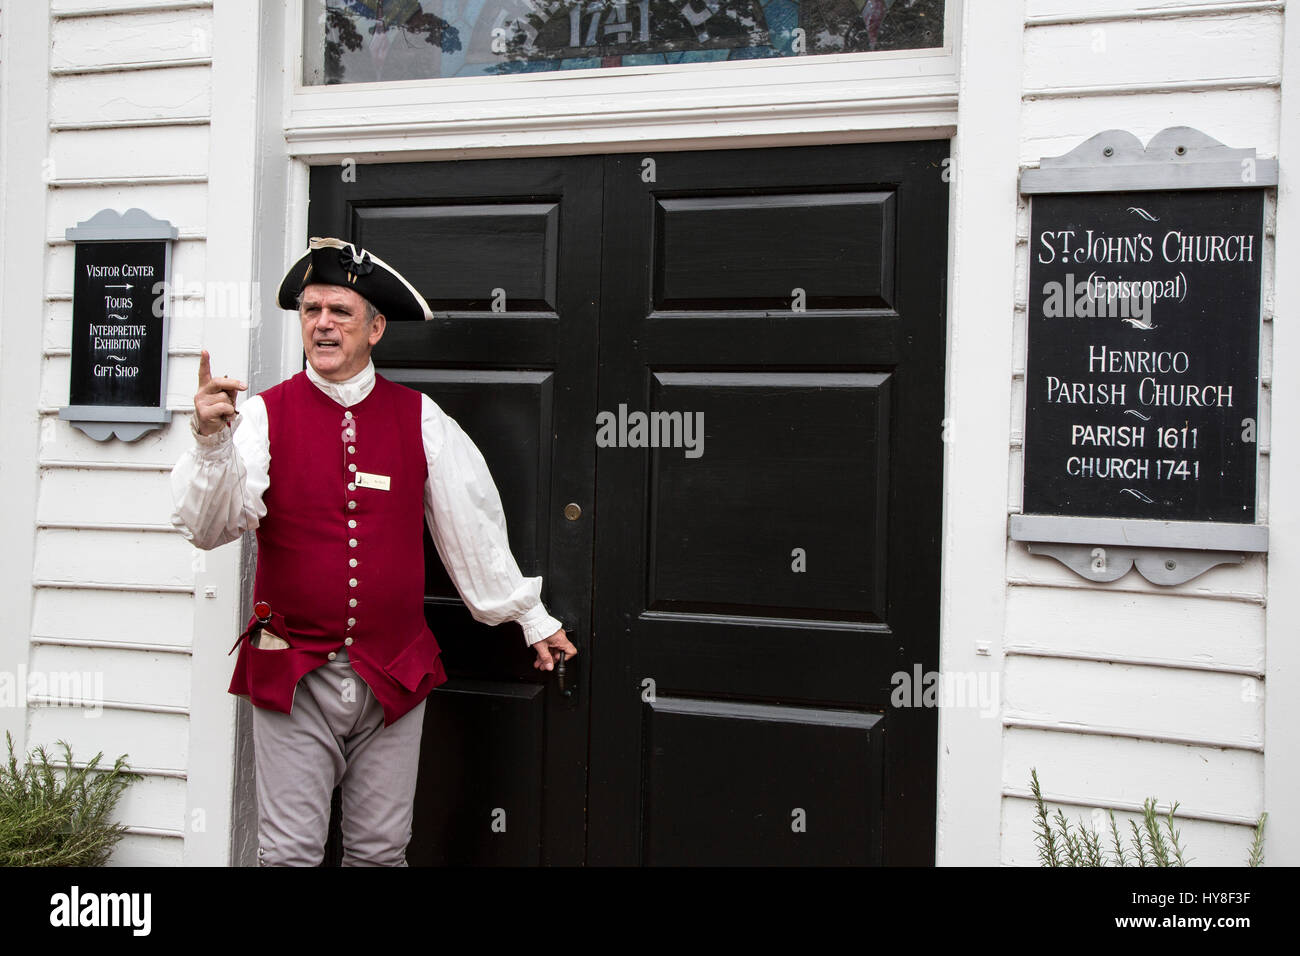 Richmond, Living History Tour Guide at the Door of St. John's Episcopal Church, site of Patrick Henry's Give Me Liberty or Give me Death Speech. Stock Photo